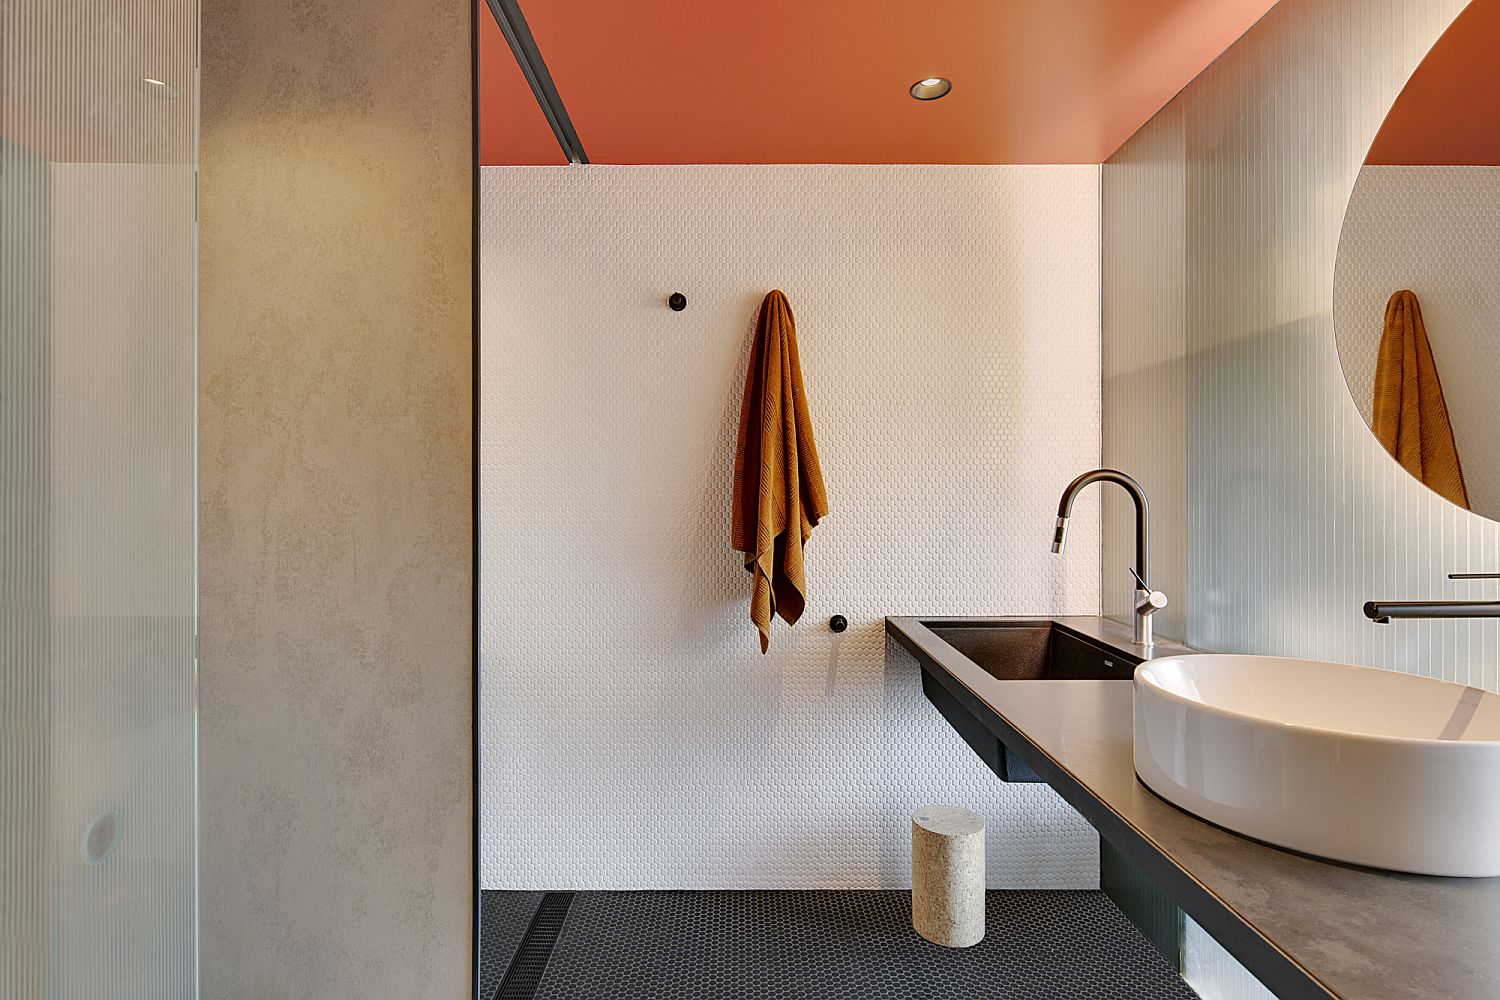 White penny tiles coupled with brilliant orange ceiling in the contemporary bathroom